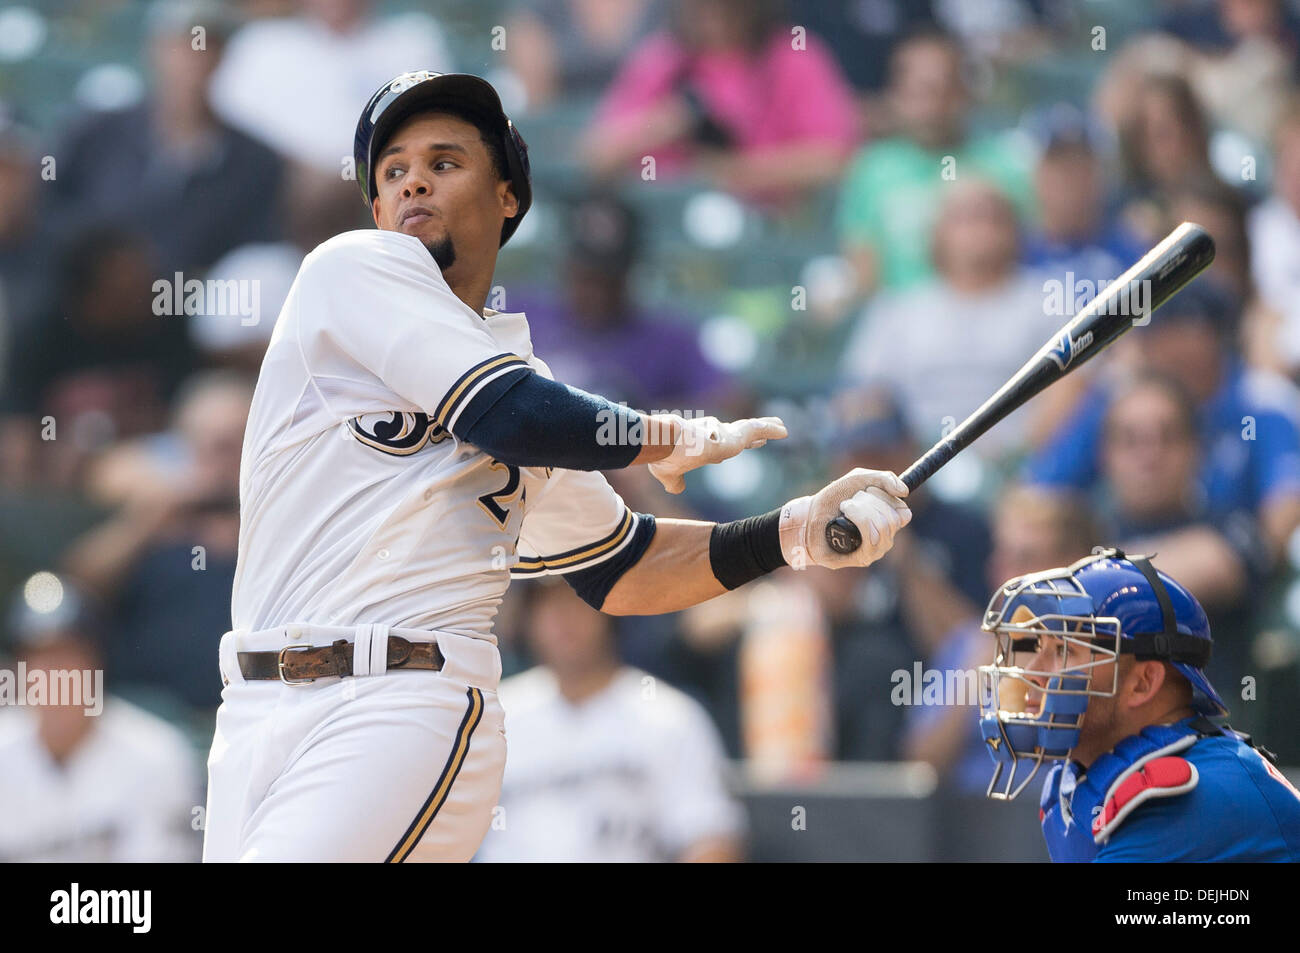 Milwaukee, Wisconsin, USA. 19th Sep, 2013. September 19th, 2013: Milwaukee Brewers center fielder Carlos Gomez #27 swings at a pitch spinning his helmet during the Major League Baseball game between the Milwaukee Brewers and the Chicago Cubs at Miller Park in Milwaukee, WI. John Fisher/CSM/Alamy Live News Stock Photo